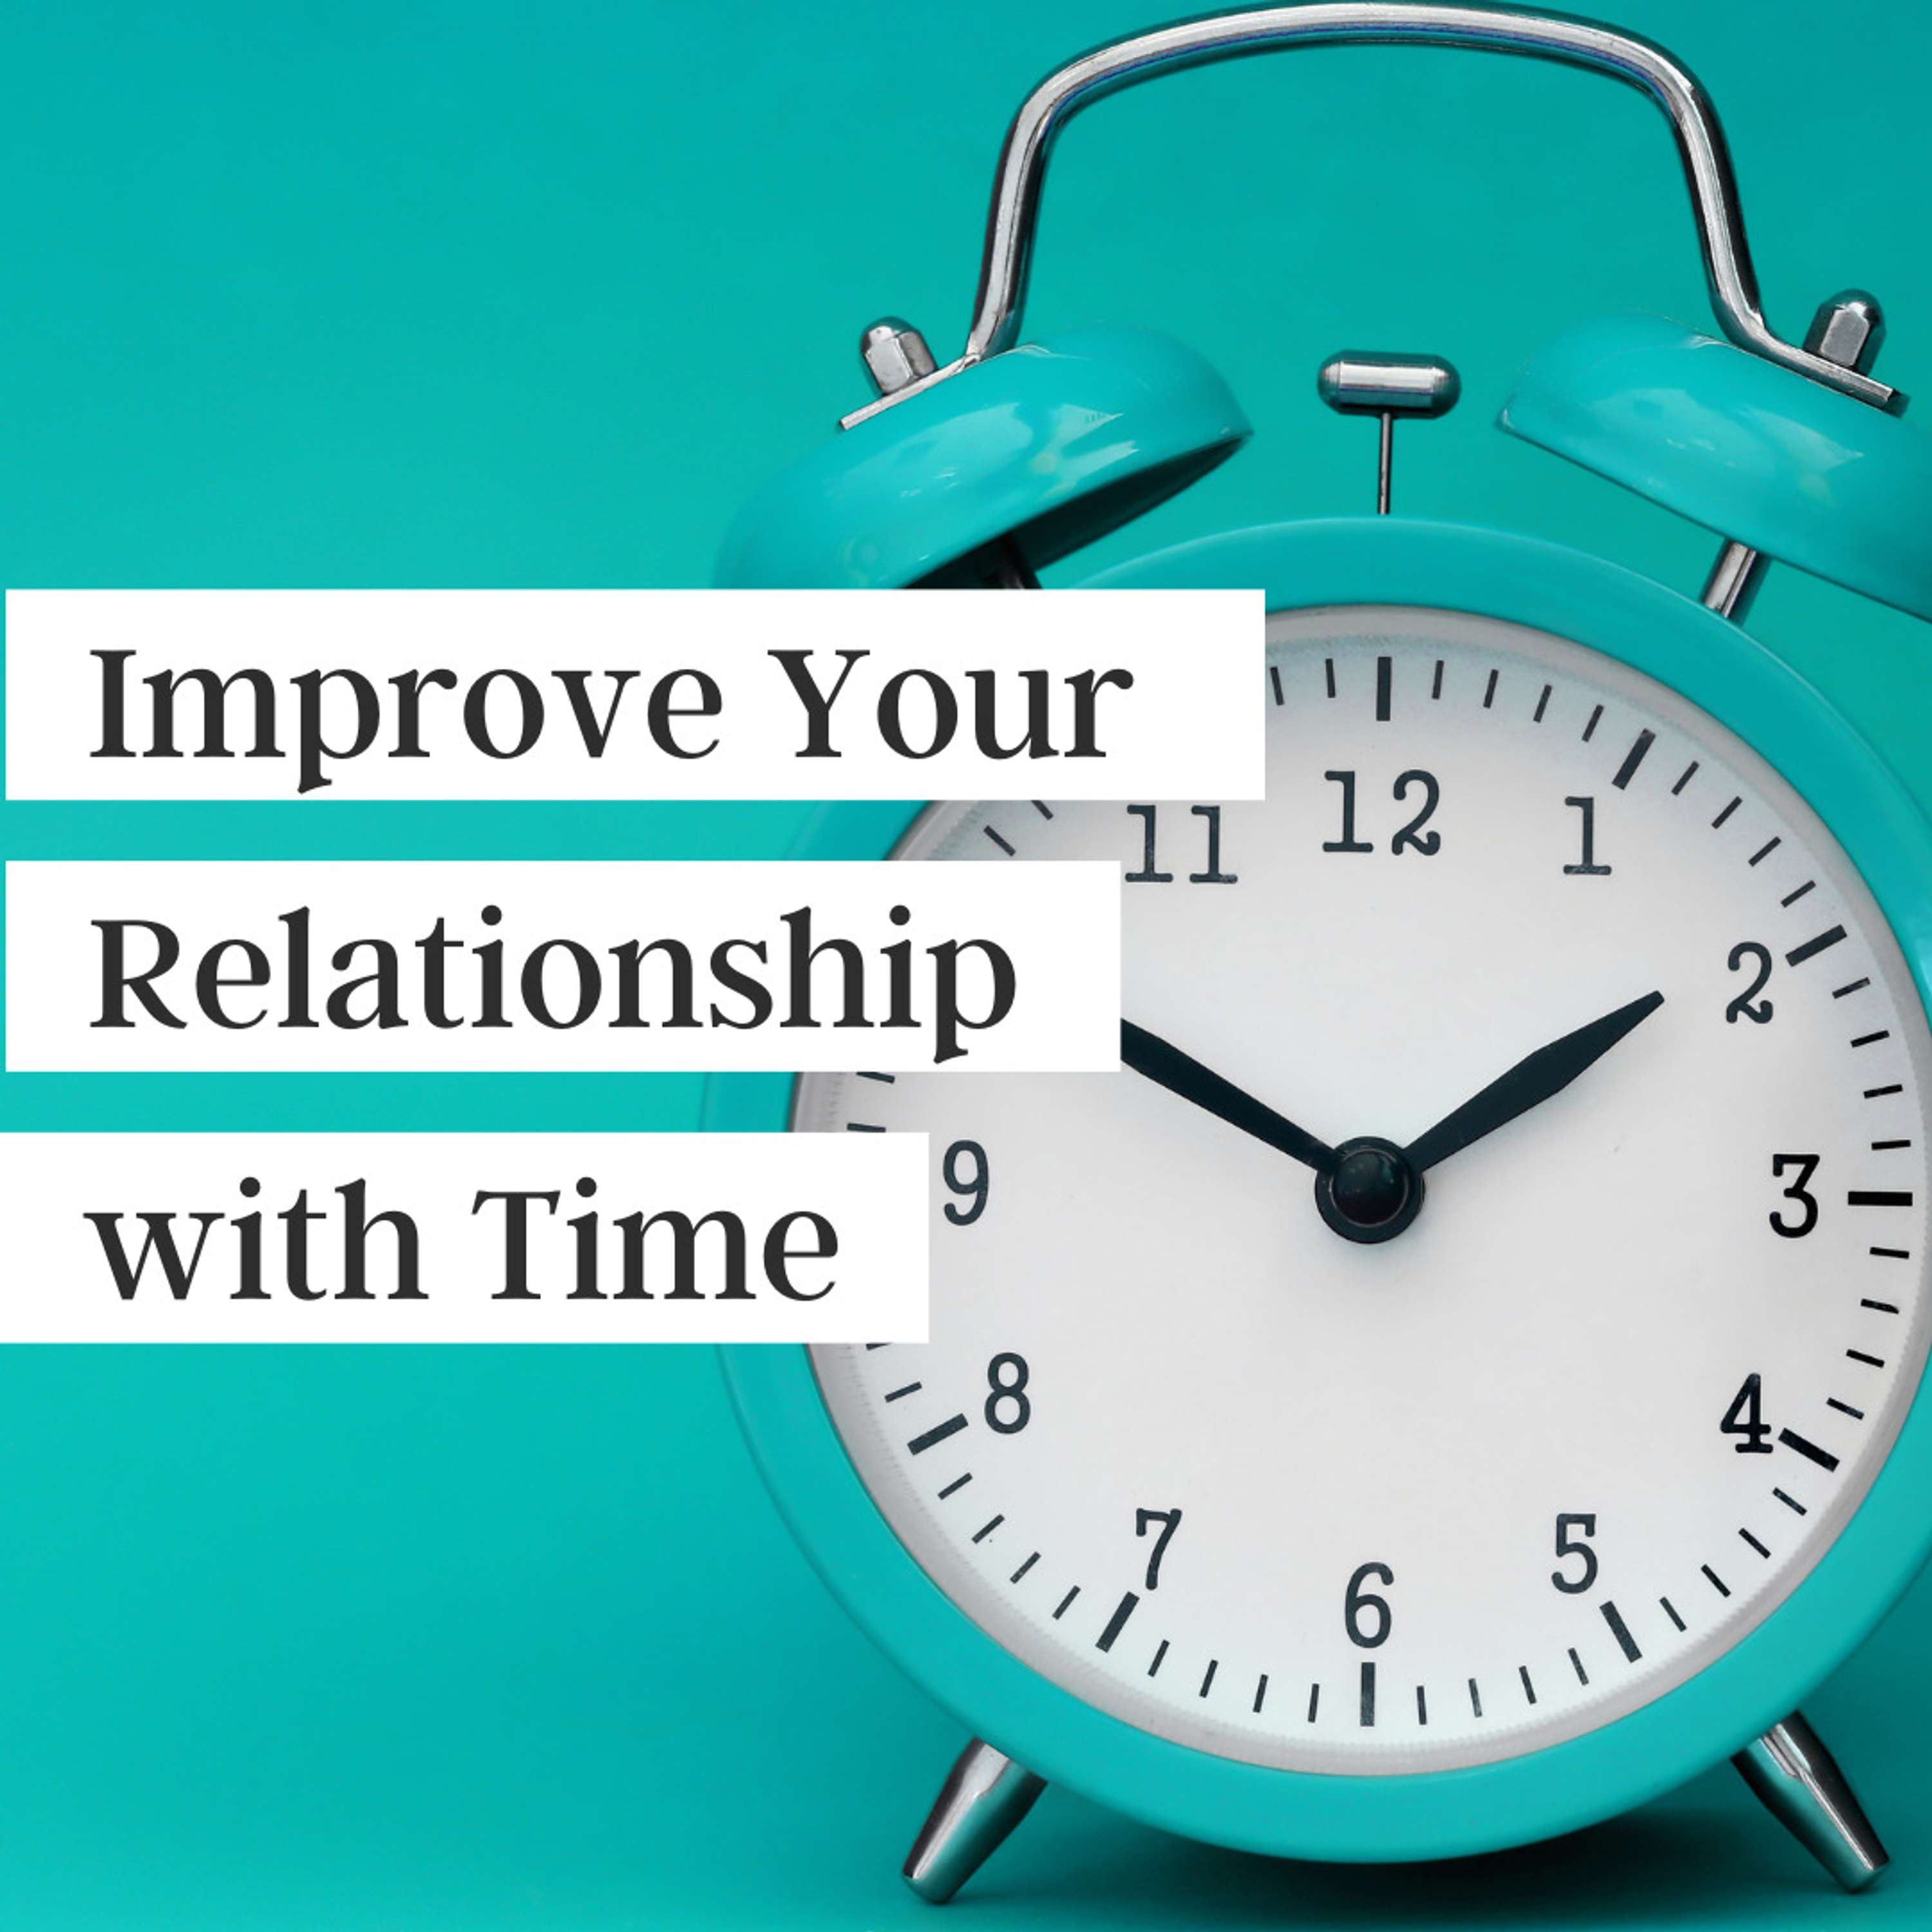 Improve Your Relationship with Time